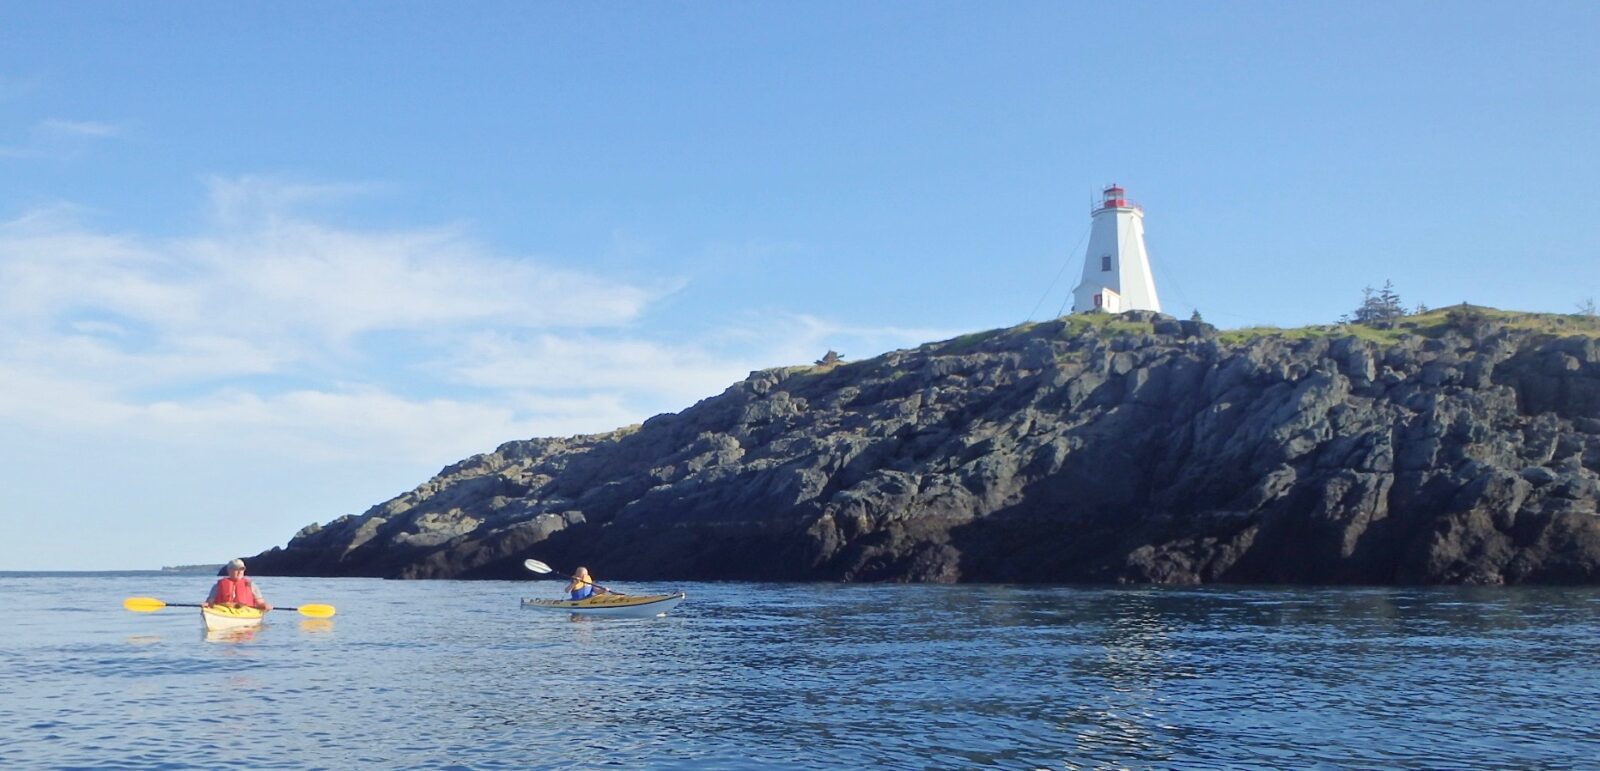 Two people paddling kayaks in the water near a lighthouse.